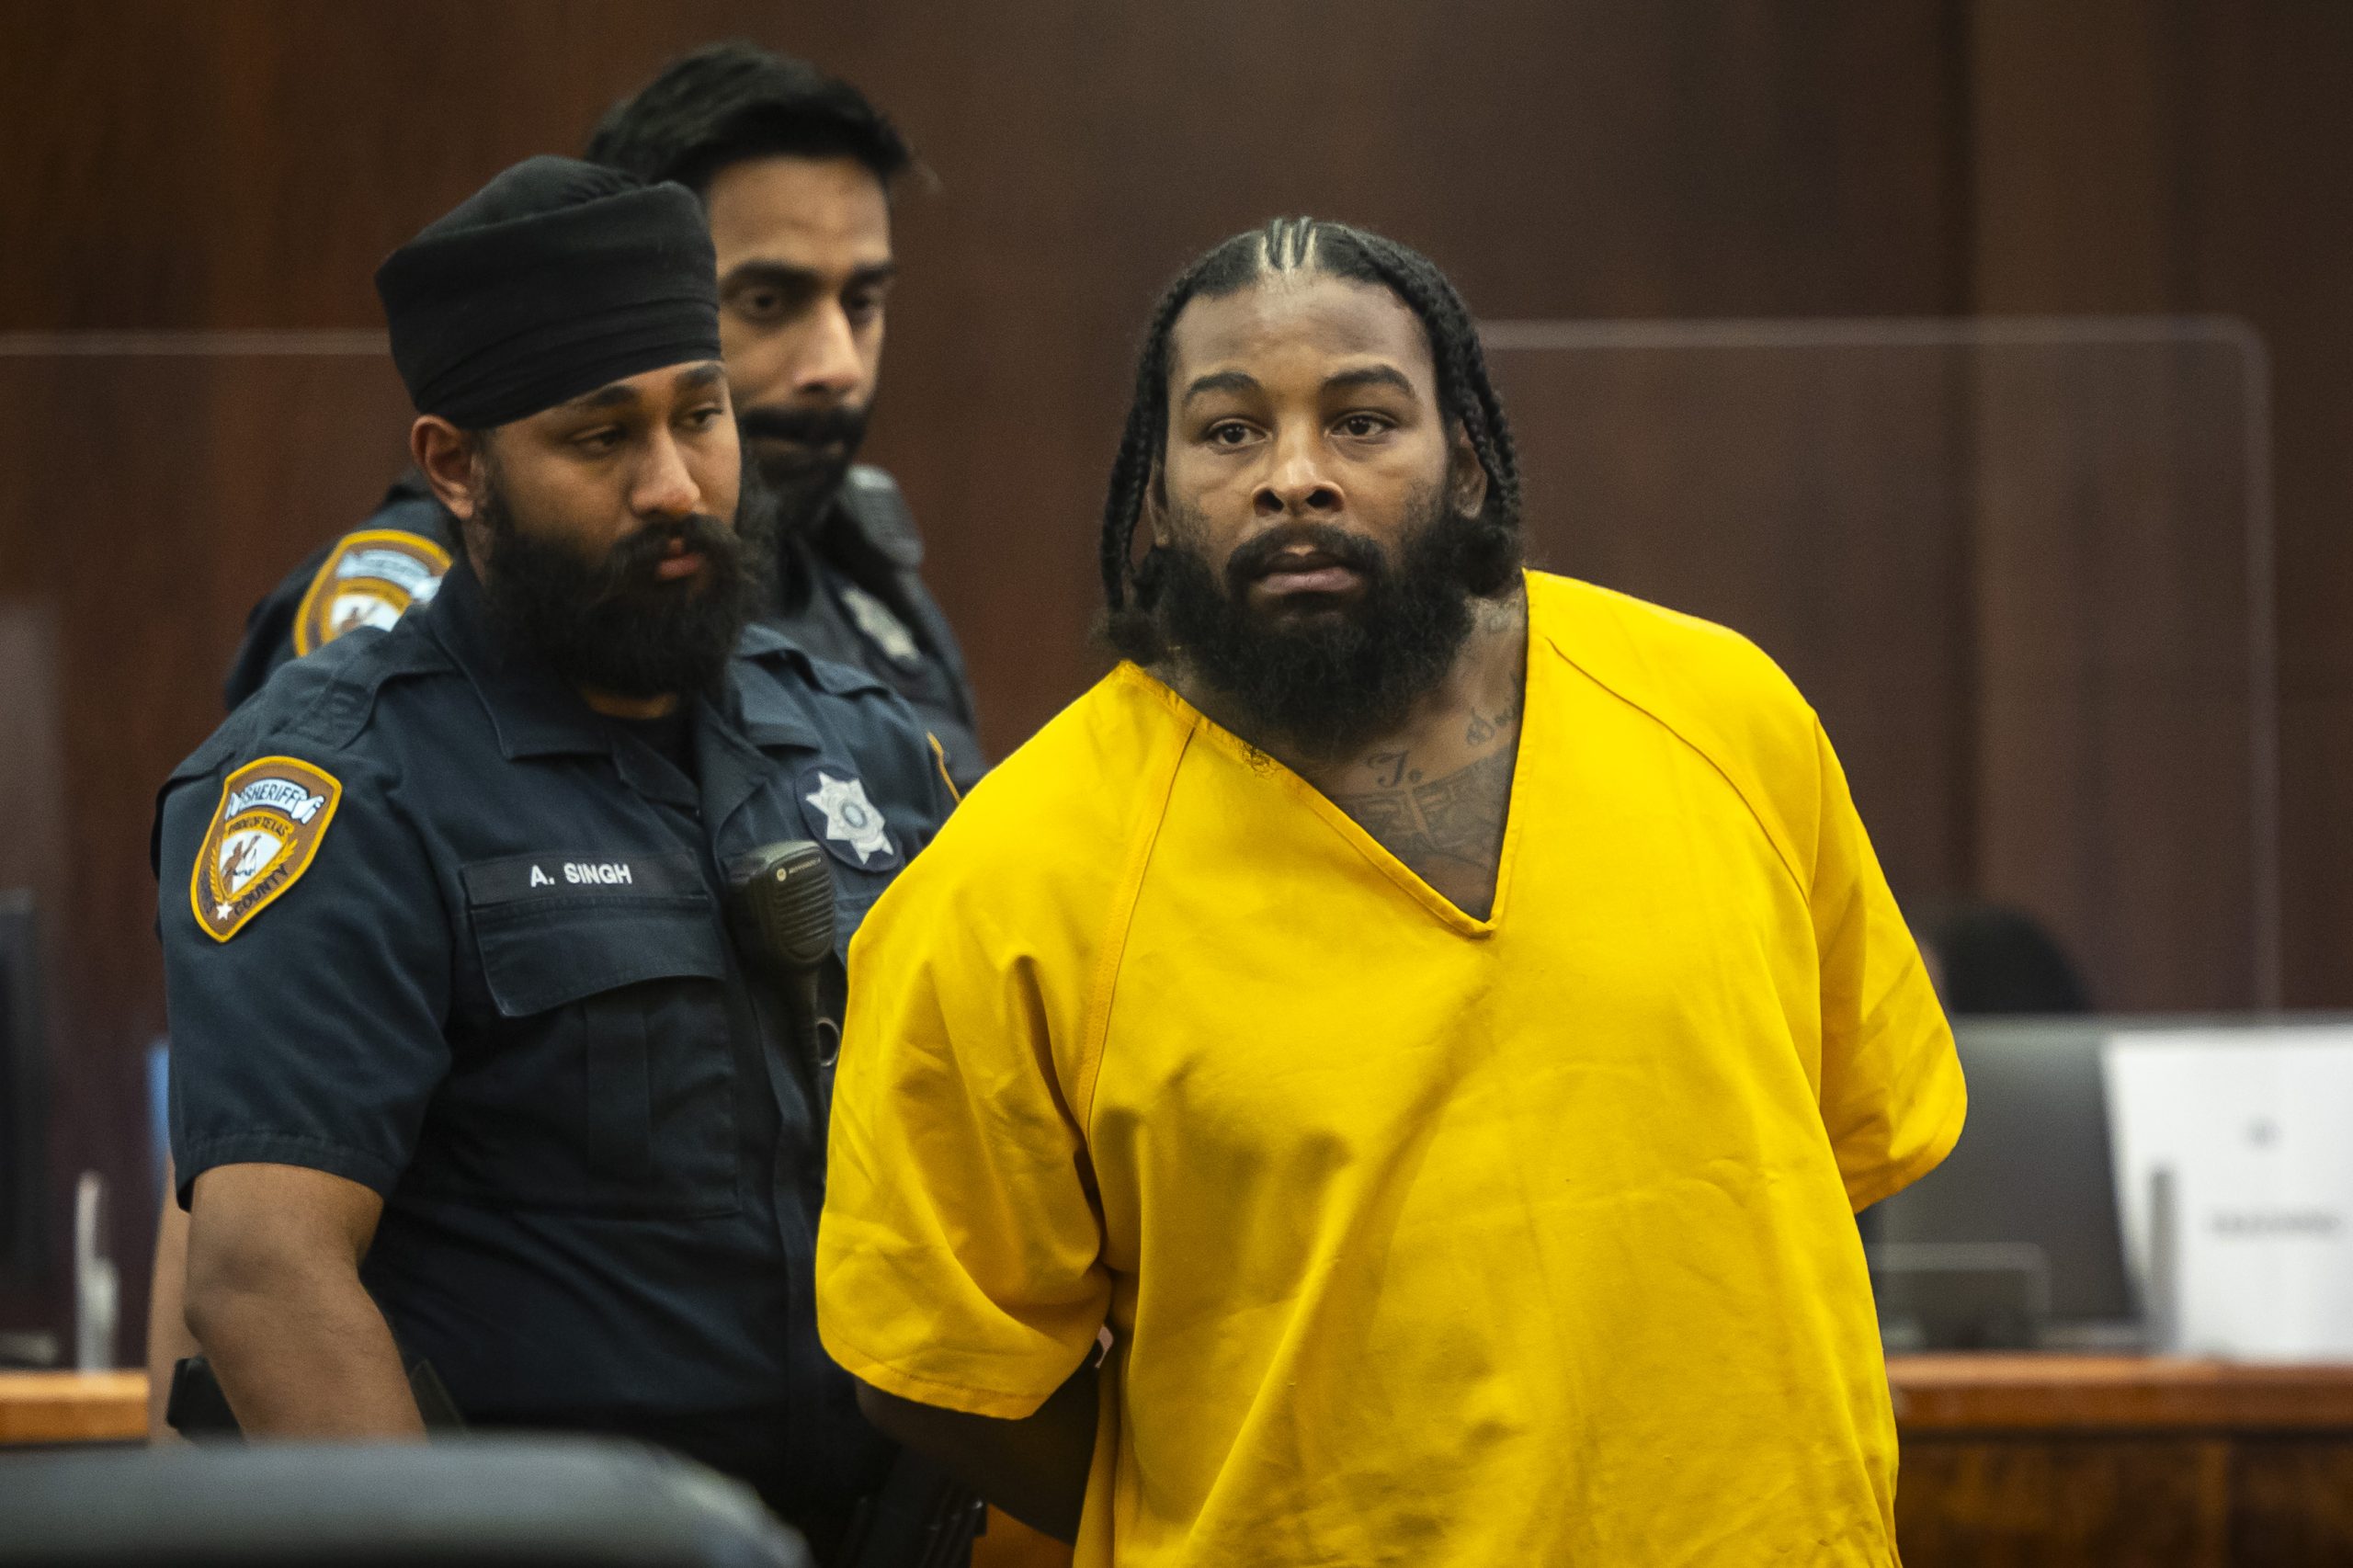 Terran Green, who faces four charges of attempted murder of a peace officer, appears in court Monday at the Harris County Criminal Justice Center in downtown Houston.